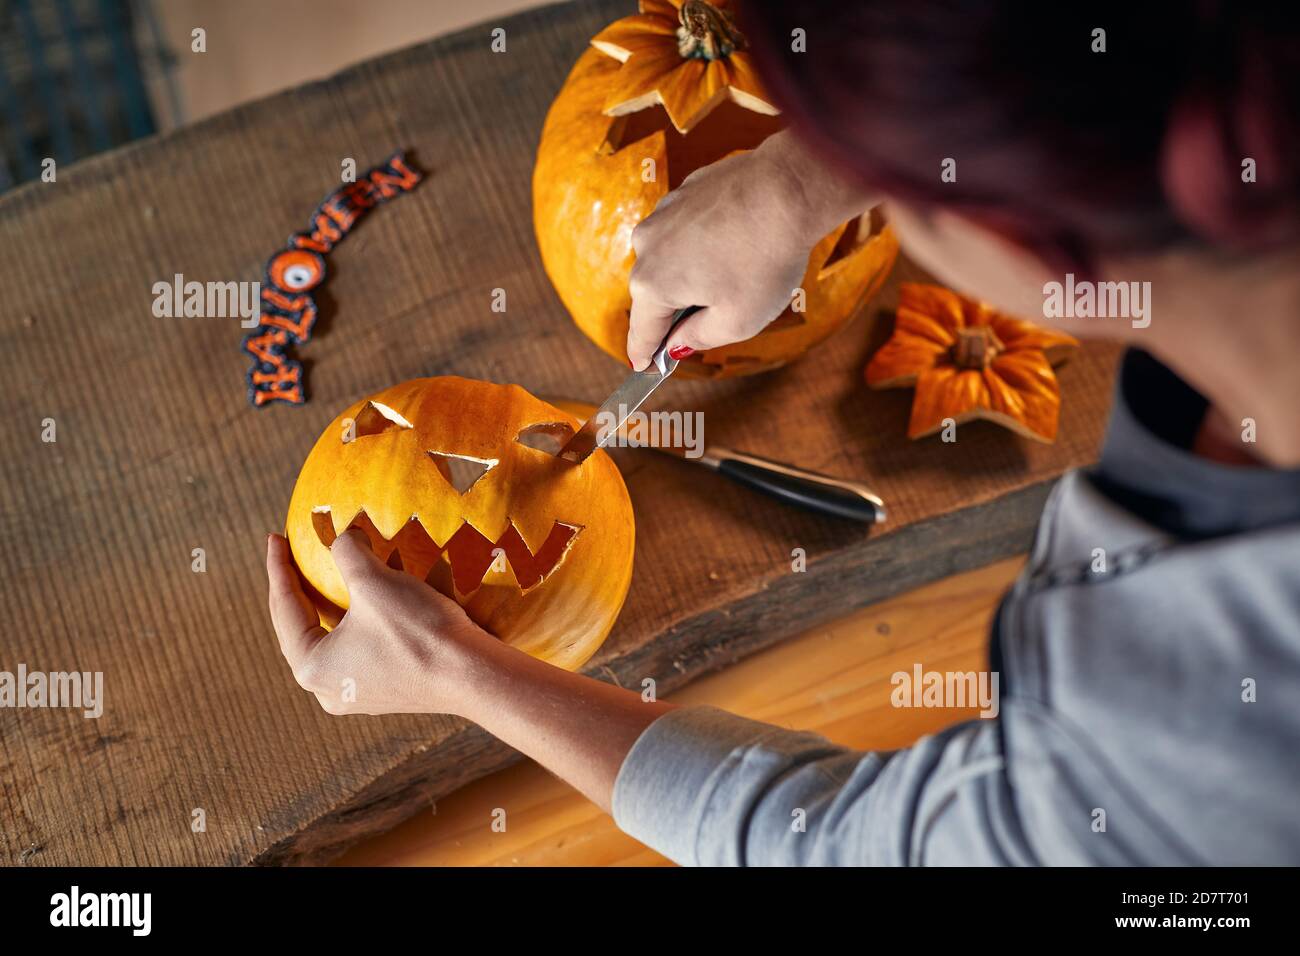 Woman carving Halloween pumpikn at home; Halloween pumpkin with a carved face Stock Photo